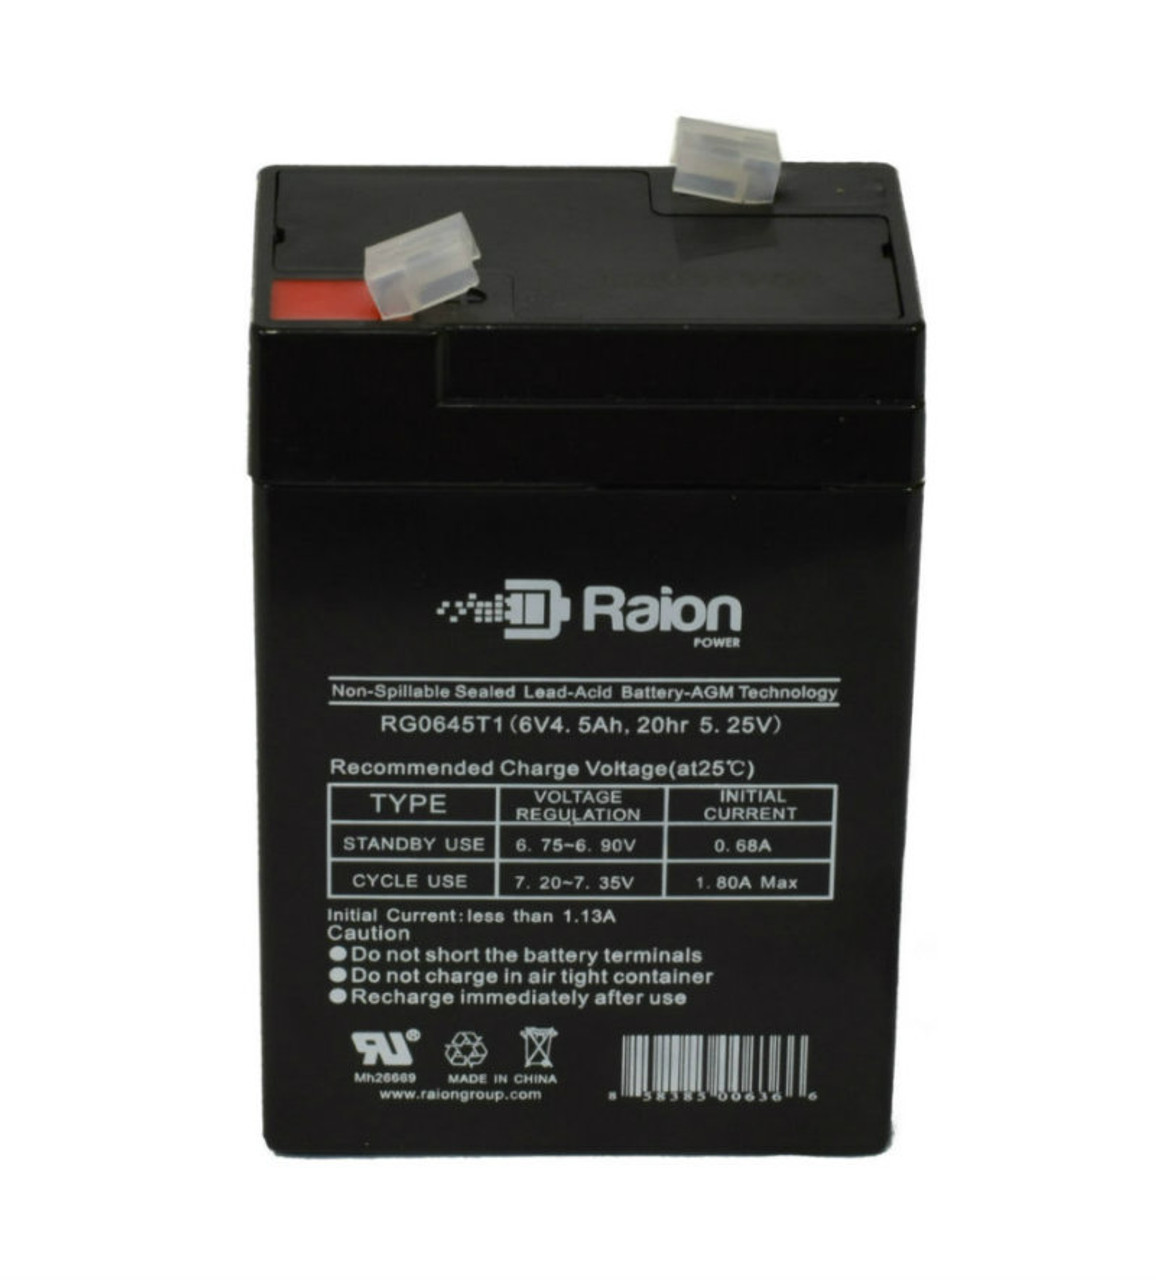 Raion Power RG0645T1 Replacement Battery Cartridge for Raion Power RG0645T1